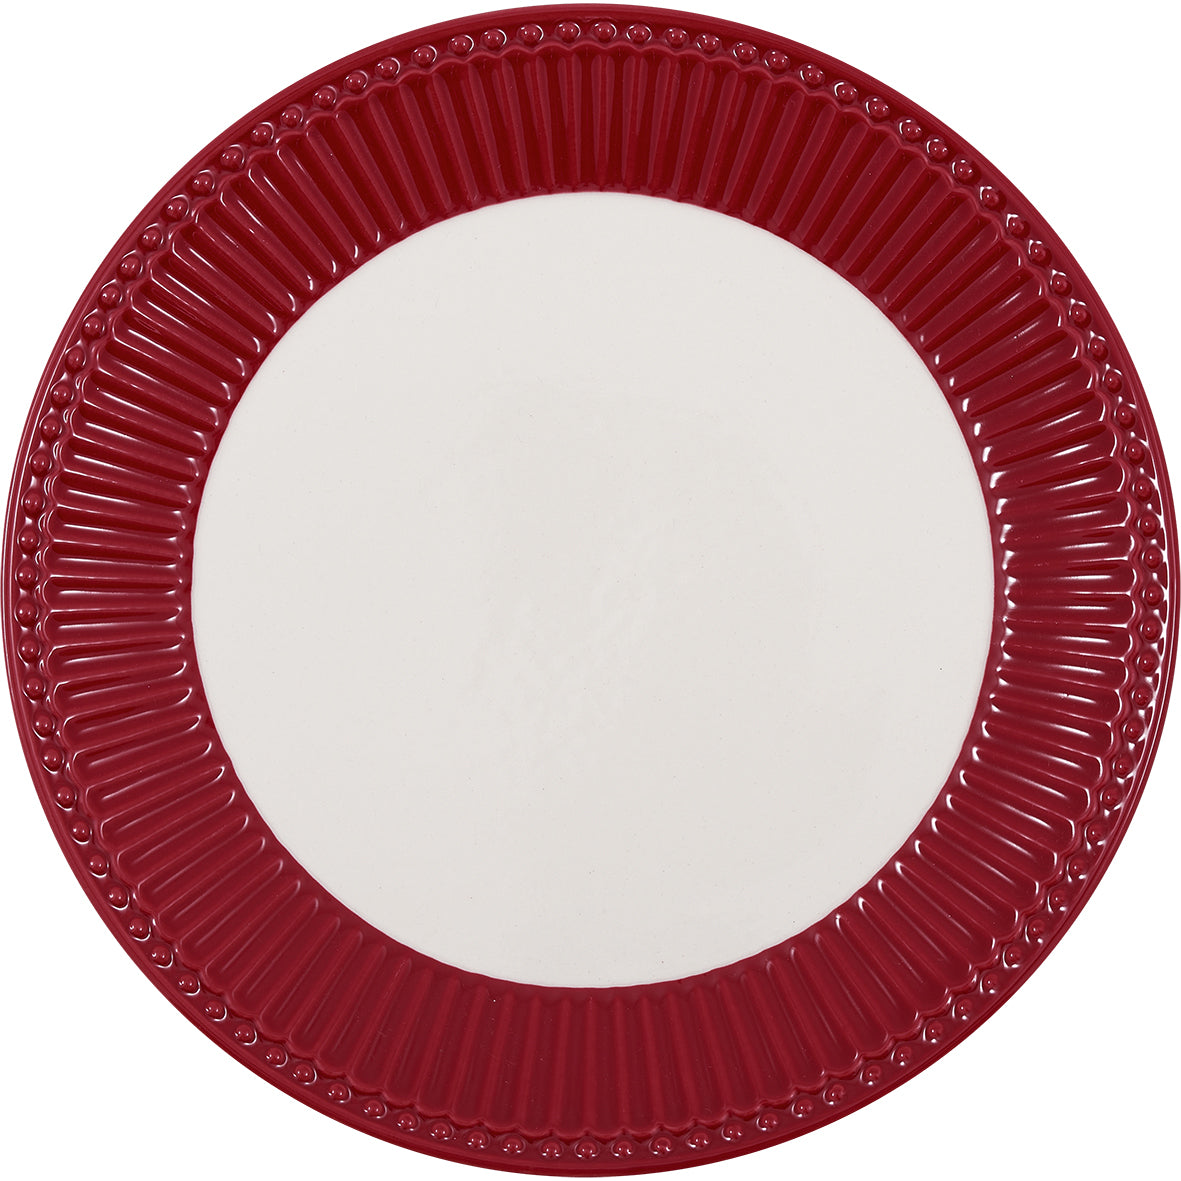 GREENGATE DINNER PLATE CLARET RED